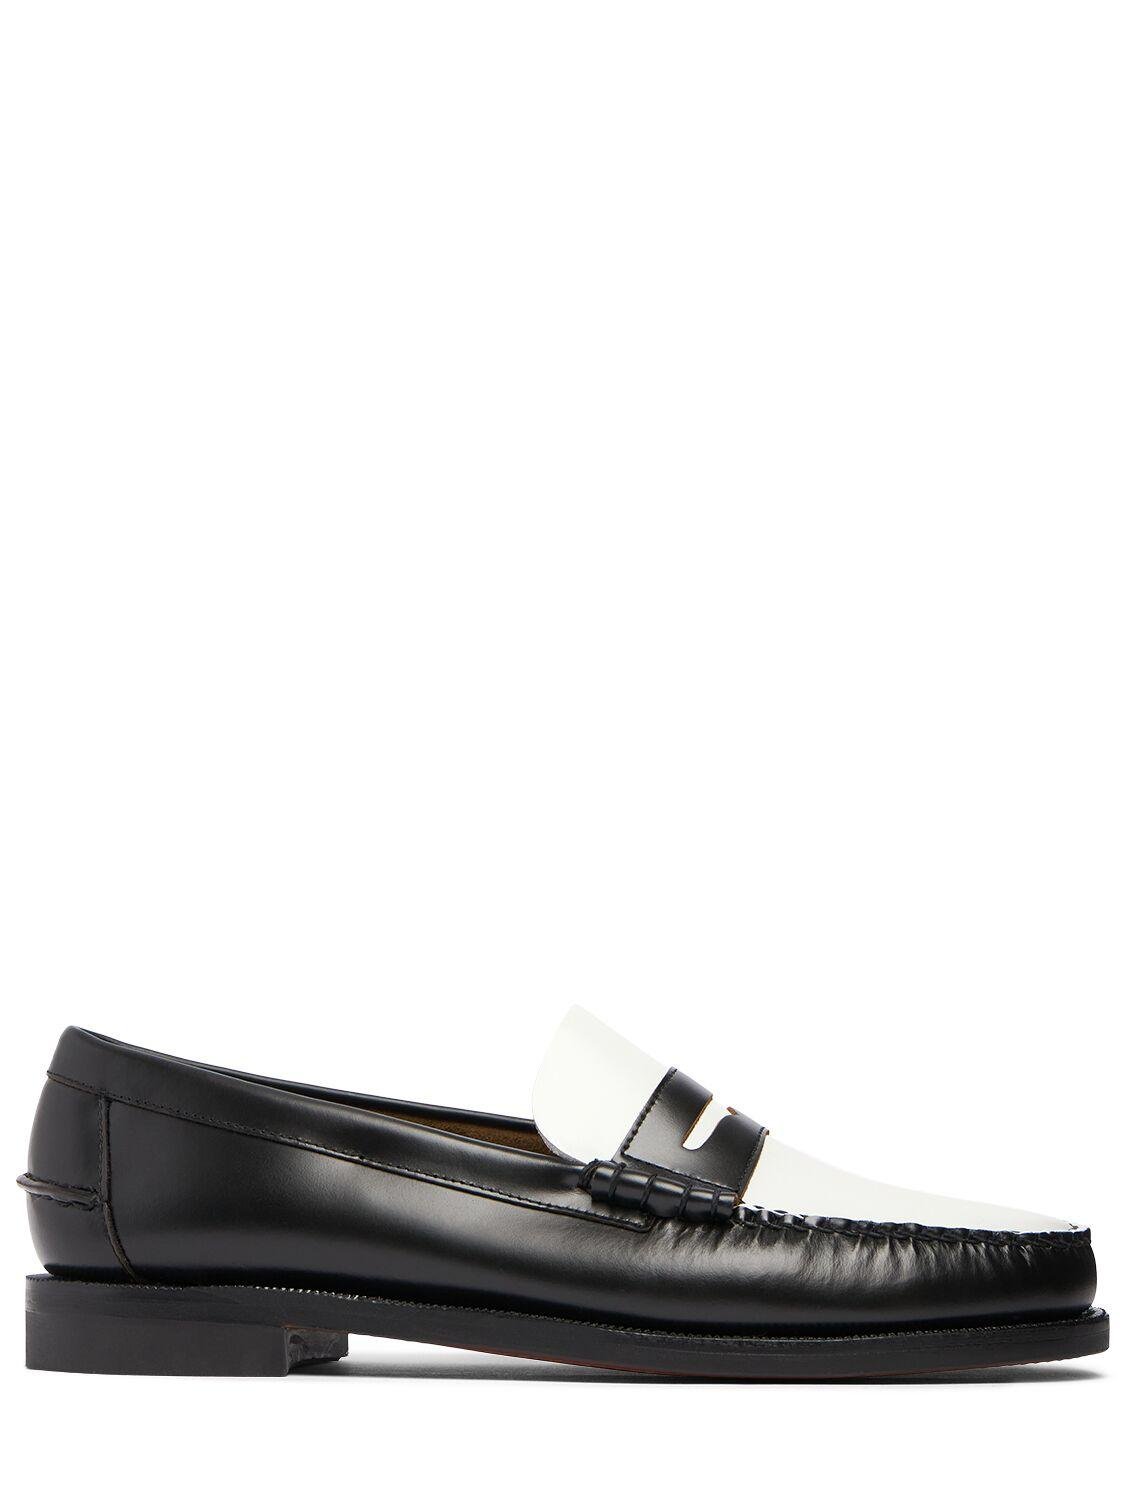 Classic Dan Smooth Leather Loafers by SEBAGO